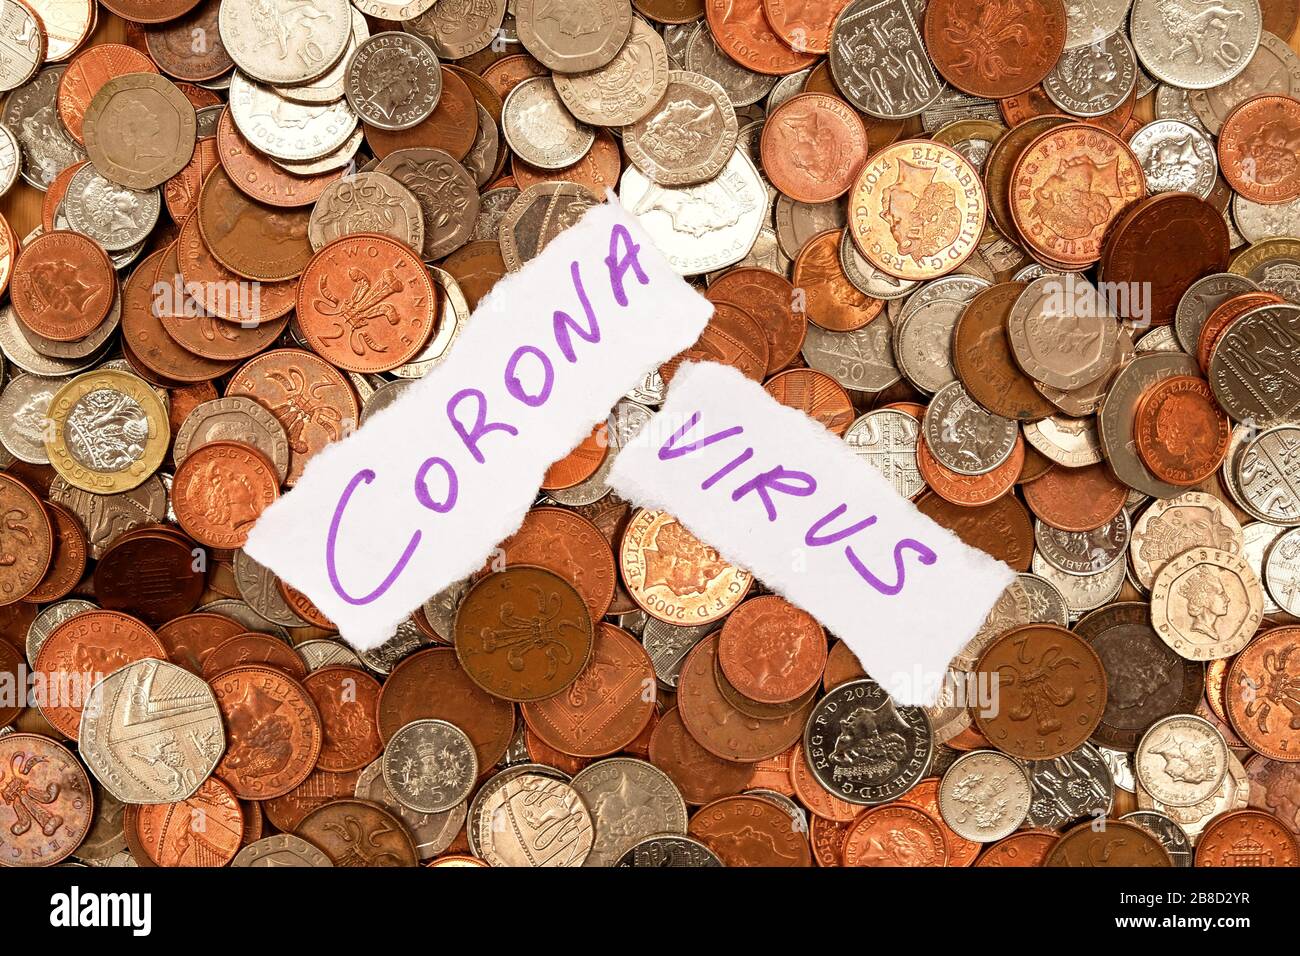 The words corona virus written in purple ink on two pieces of ripped white paper the paper is laying on top of hundreds of silver and copper coloured Stock Photo